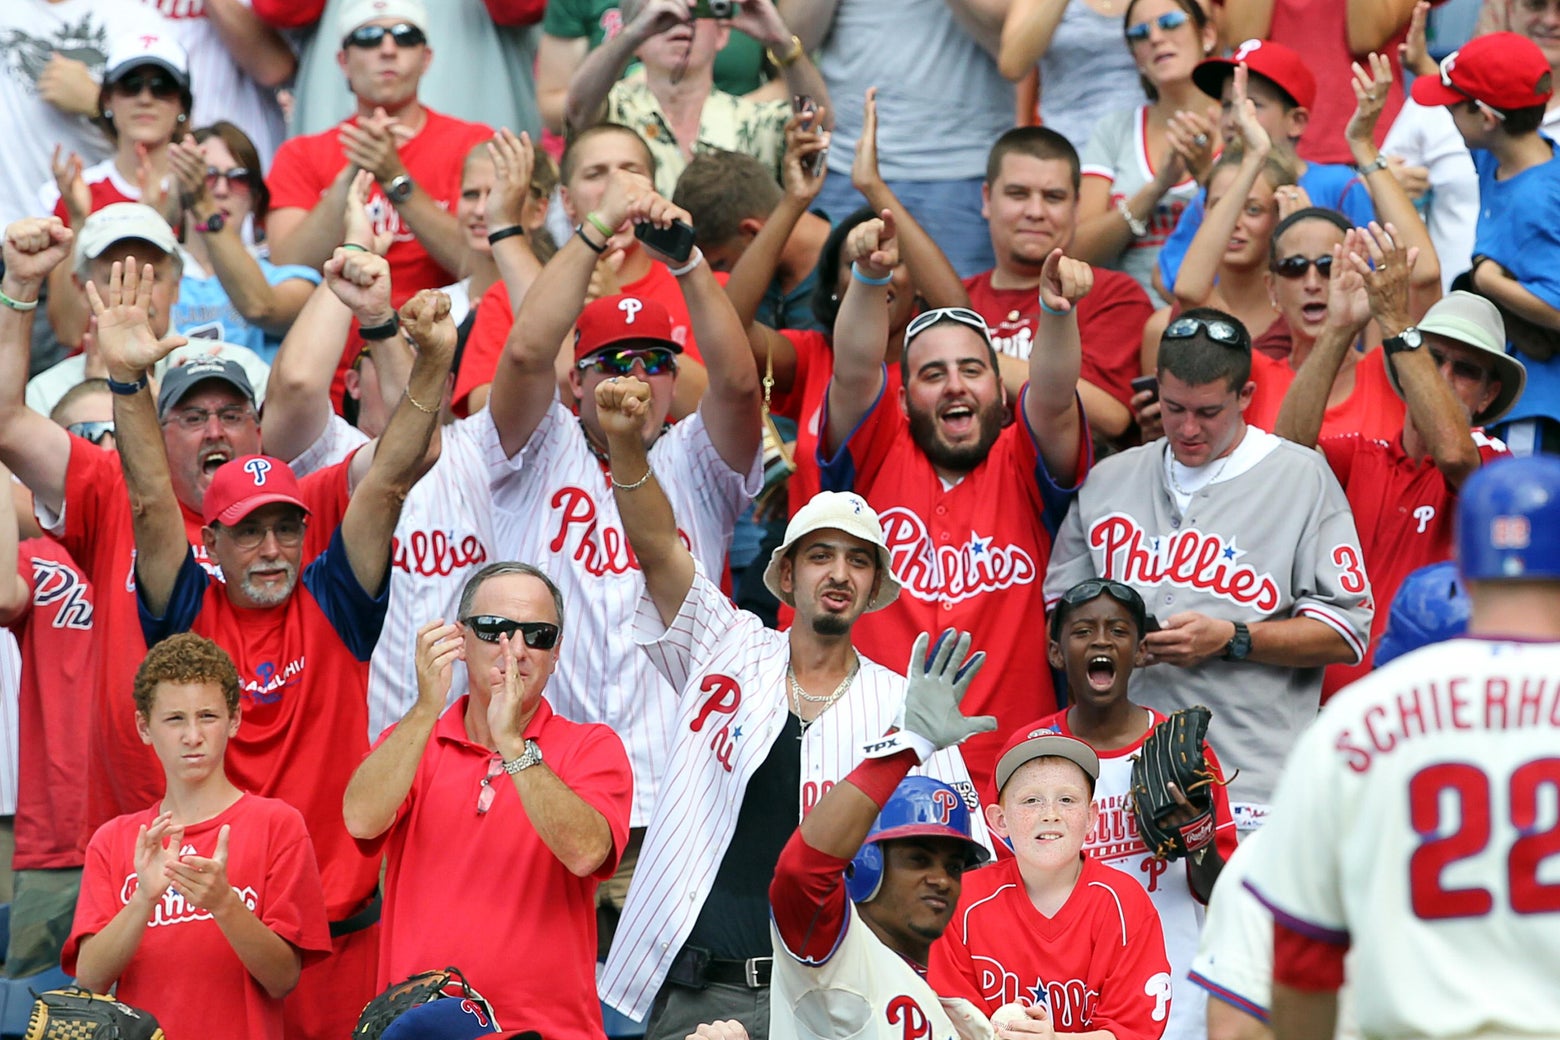 Philadelphia Phillies fans should be absolutely EMBARRASSED by